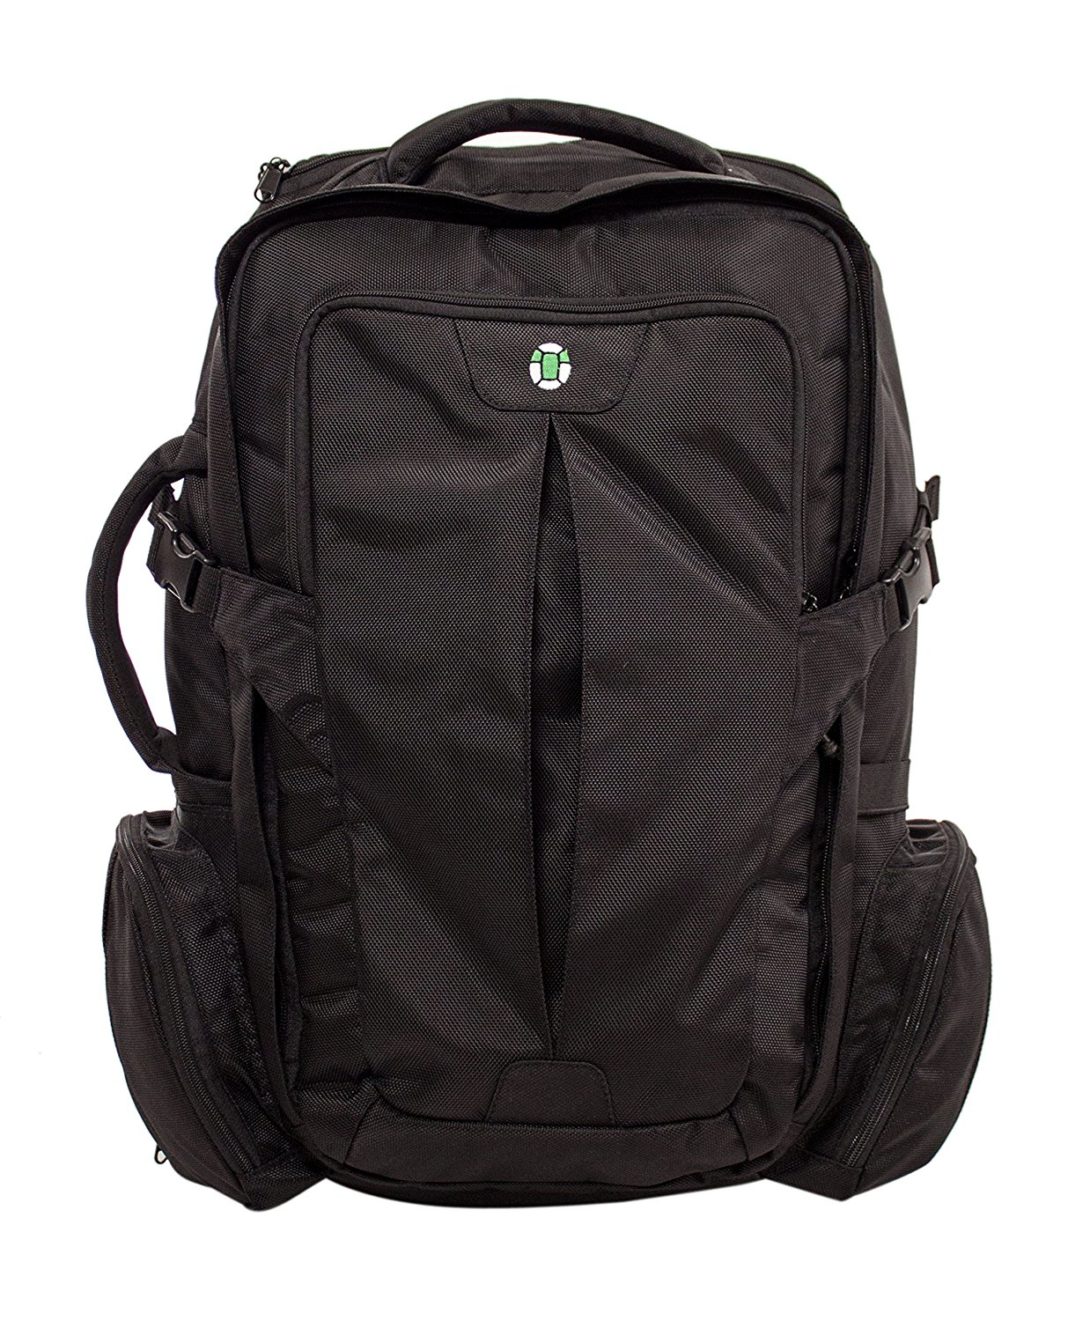 gifts for travelers - Tortuga Travel Backpack